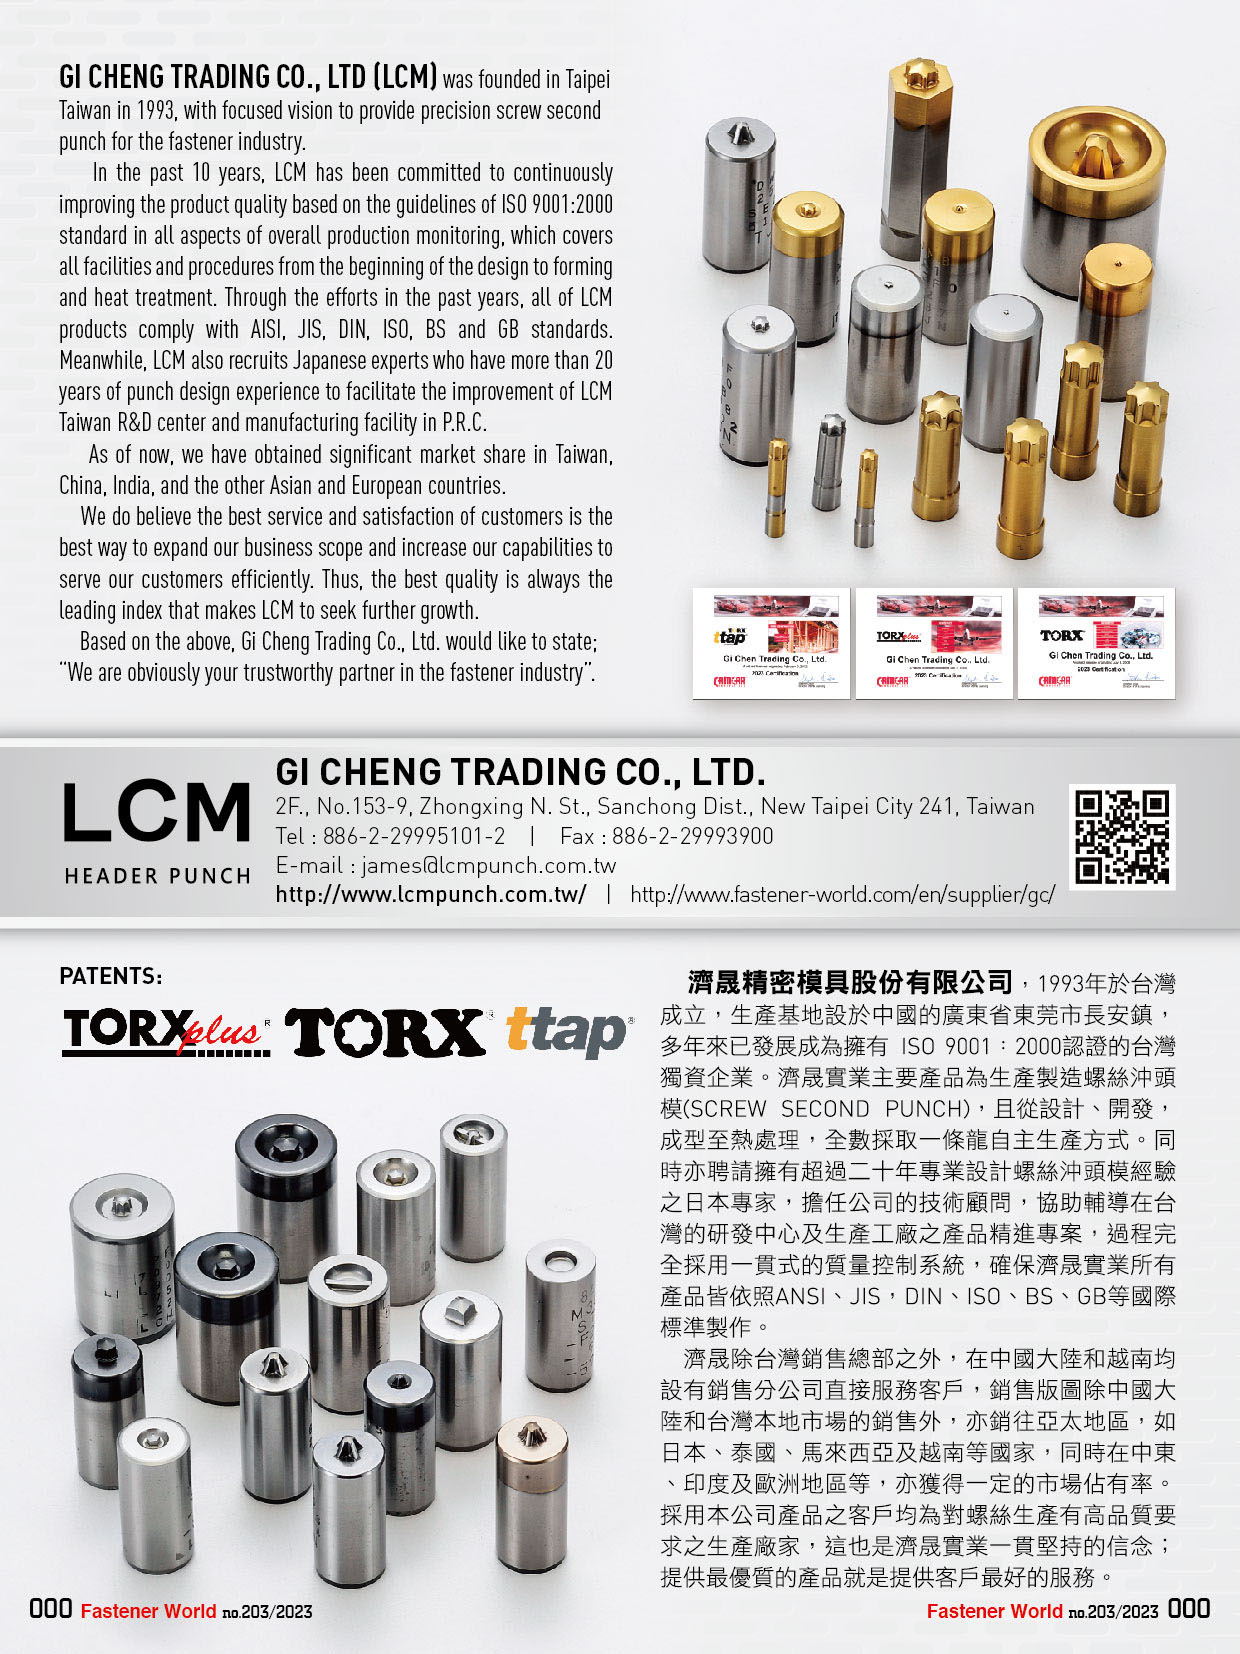 GI CHENG TRADING CO., LTD. , Precision Screw Second Punch , Multi-die Punches